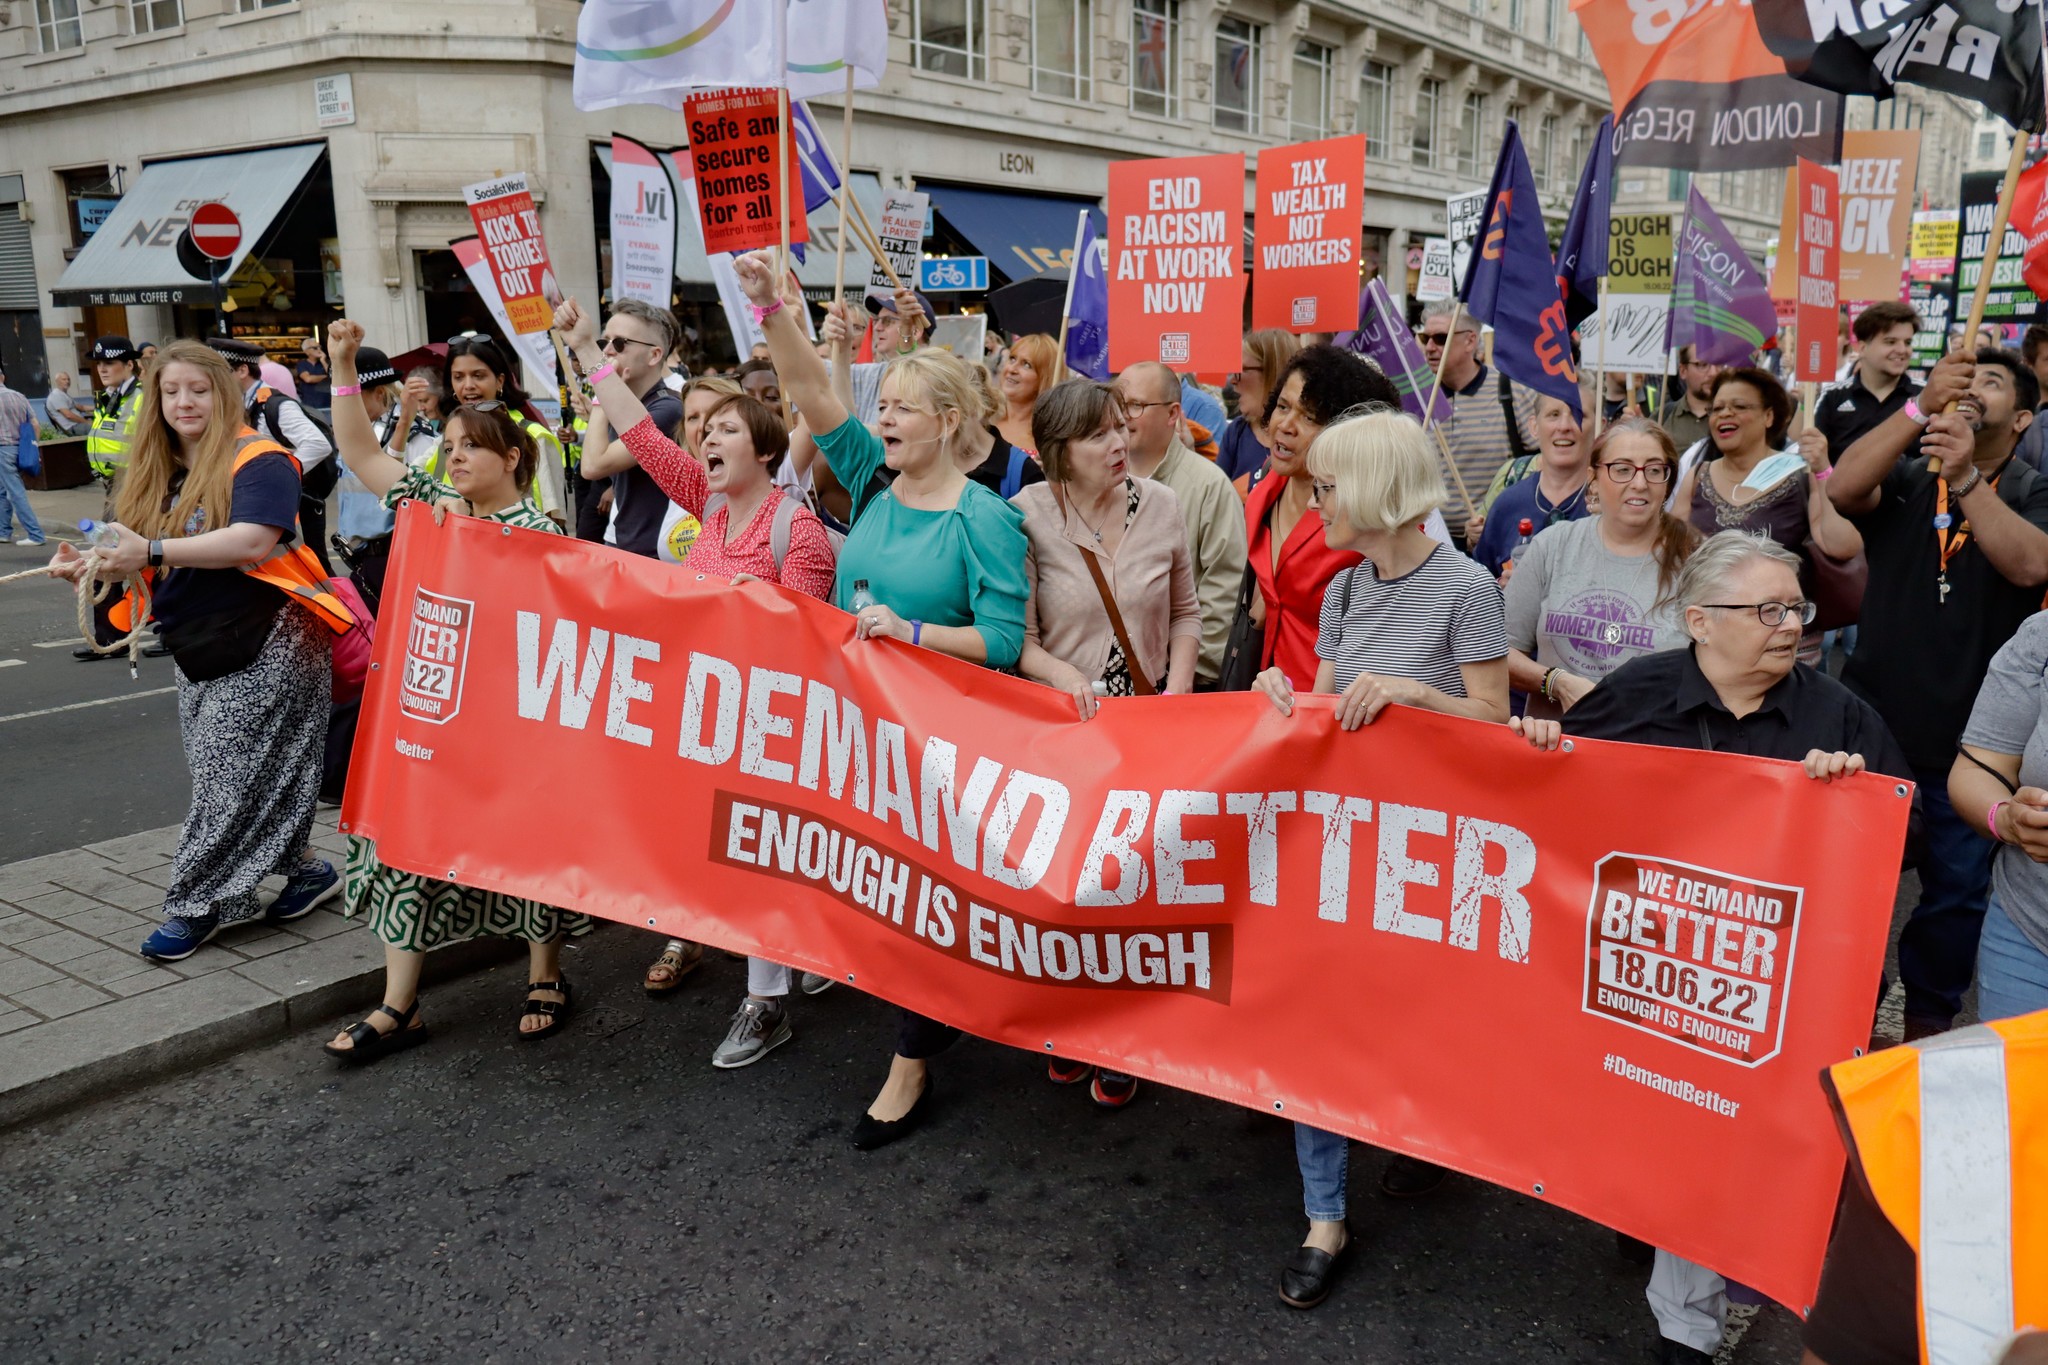 Sharon Graham and Frances O'Grady at the "We Demand Better" TUC rally